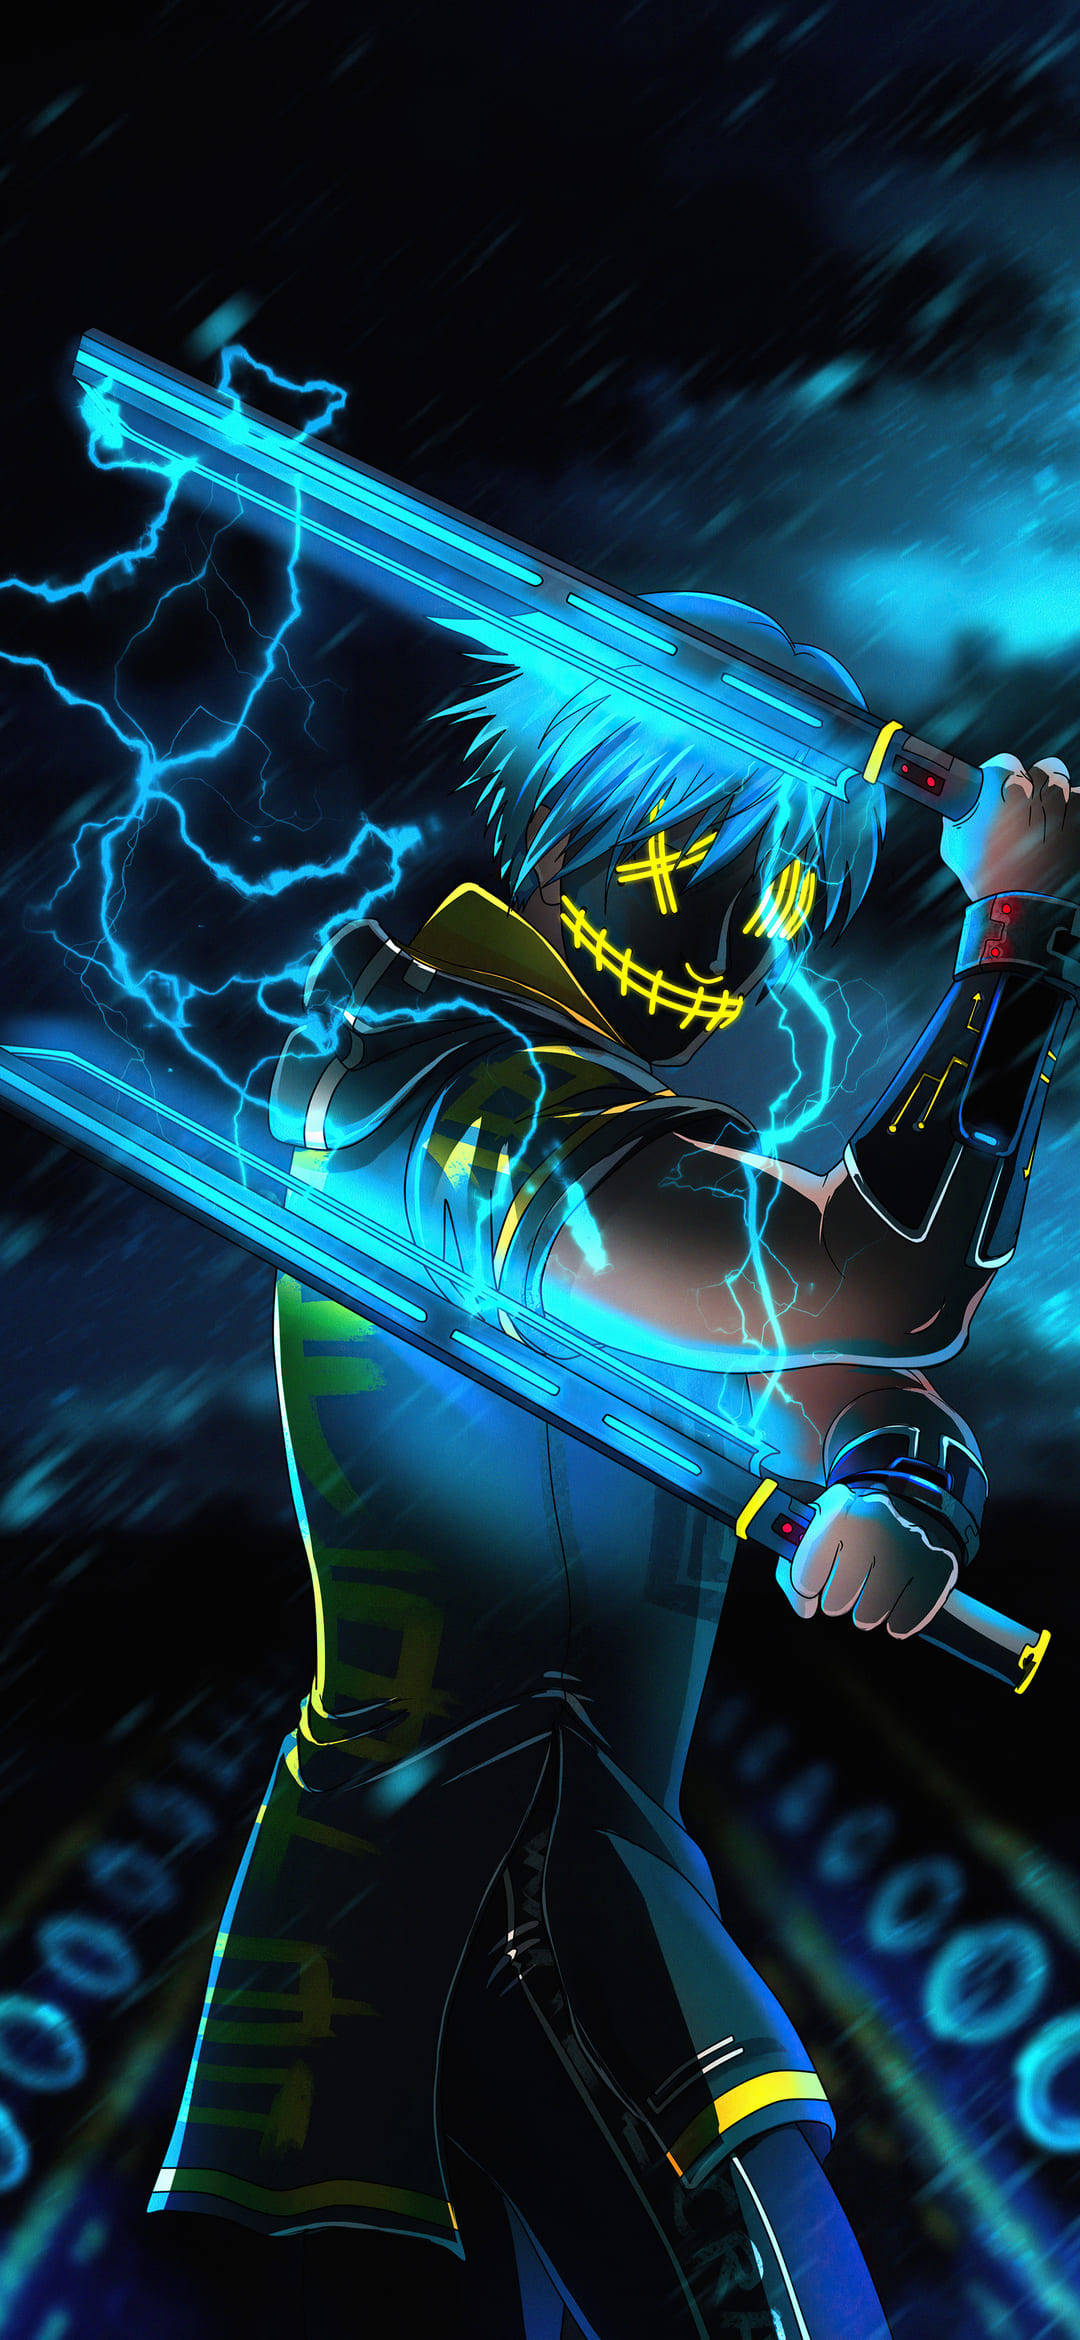 Cool Anime Phone Boy With Neon Swords Wallpaper